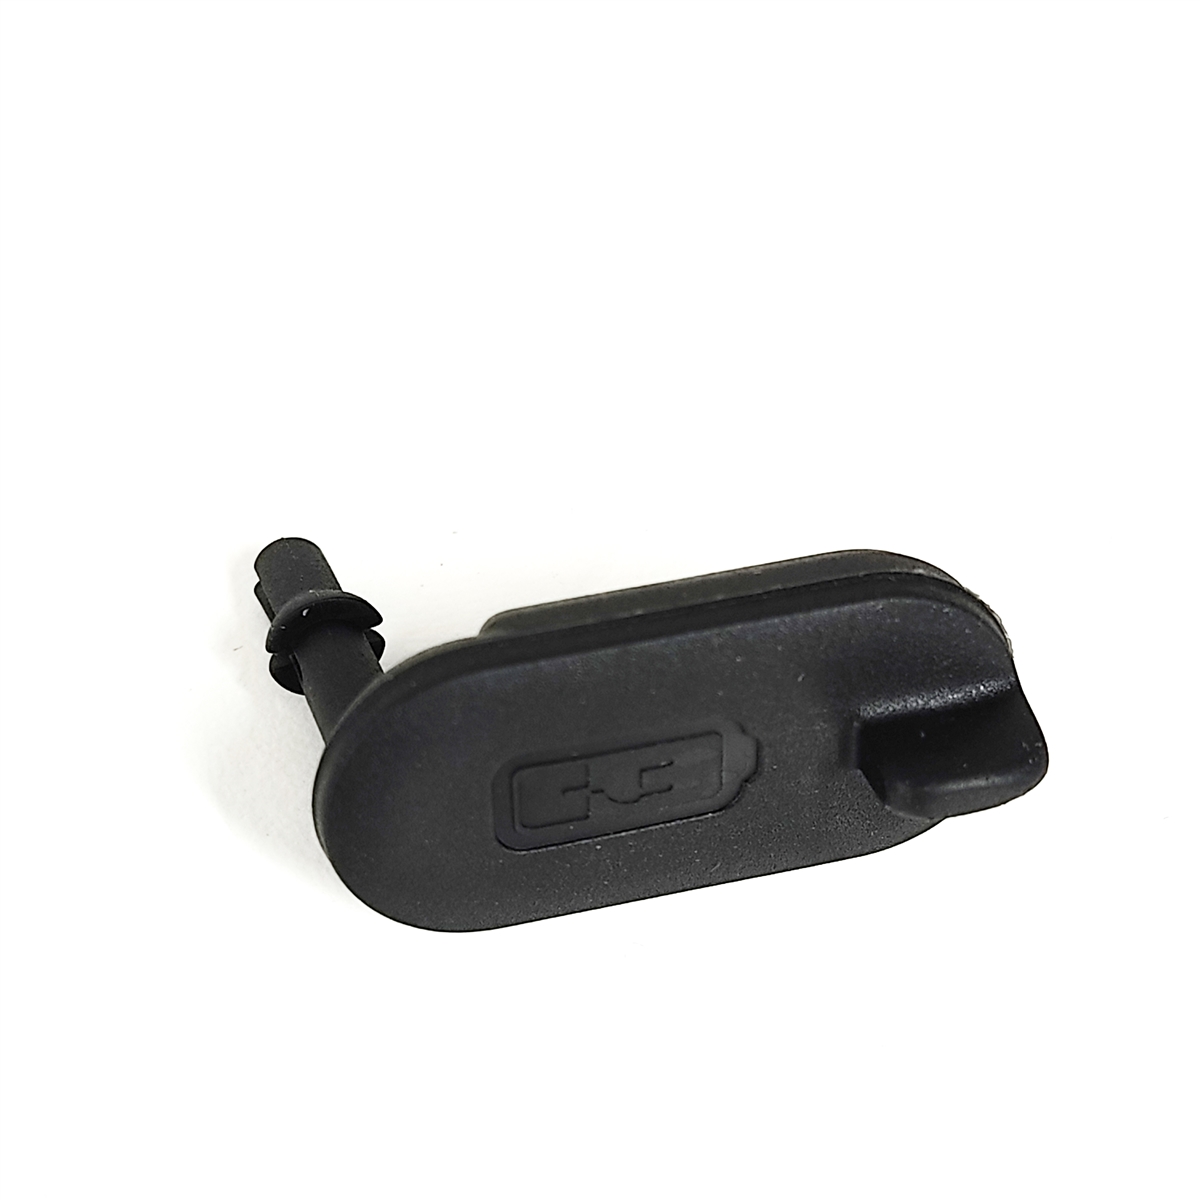 Replacement battery cap for Hyper T970 models